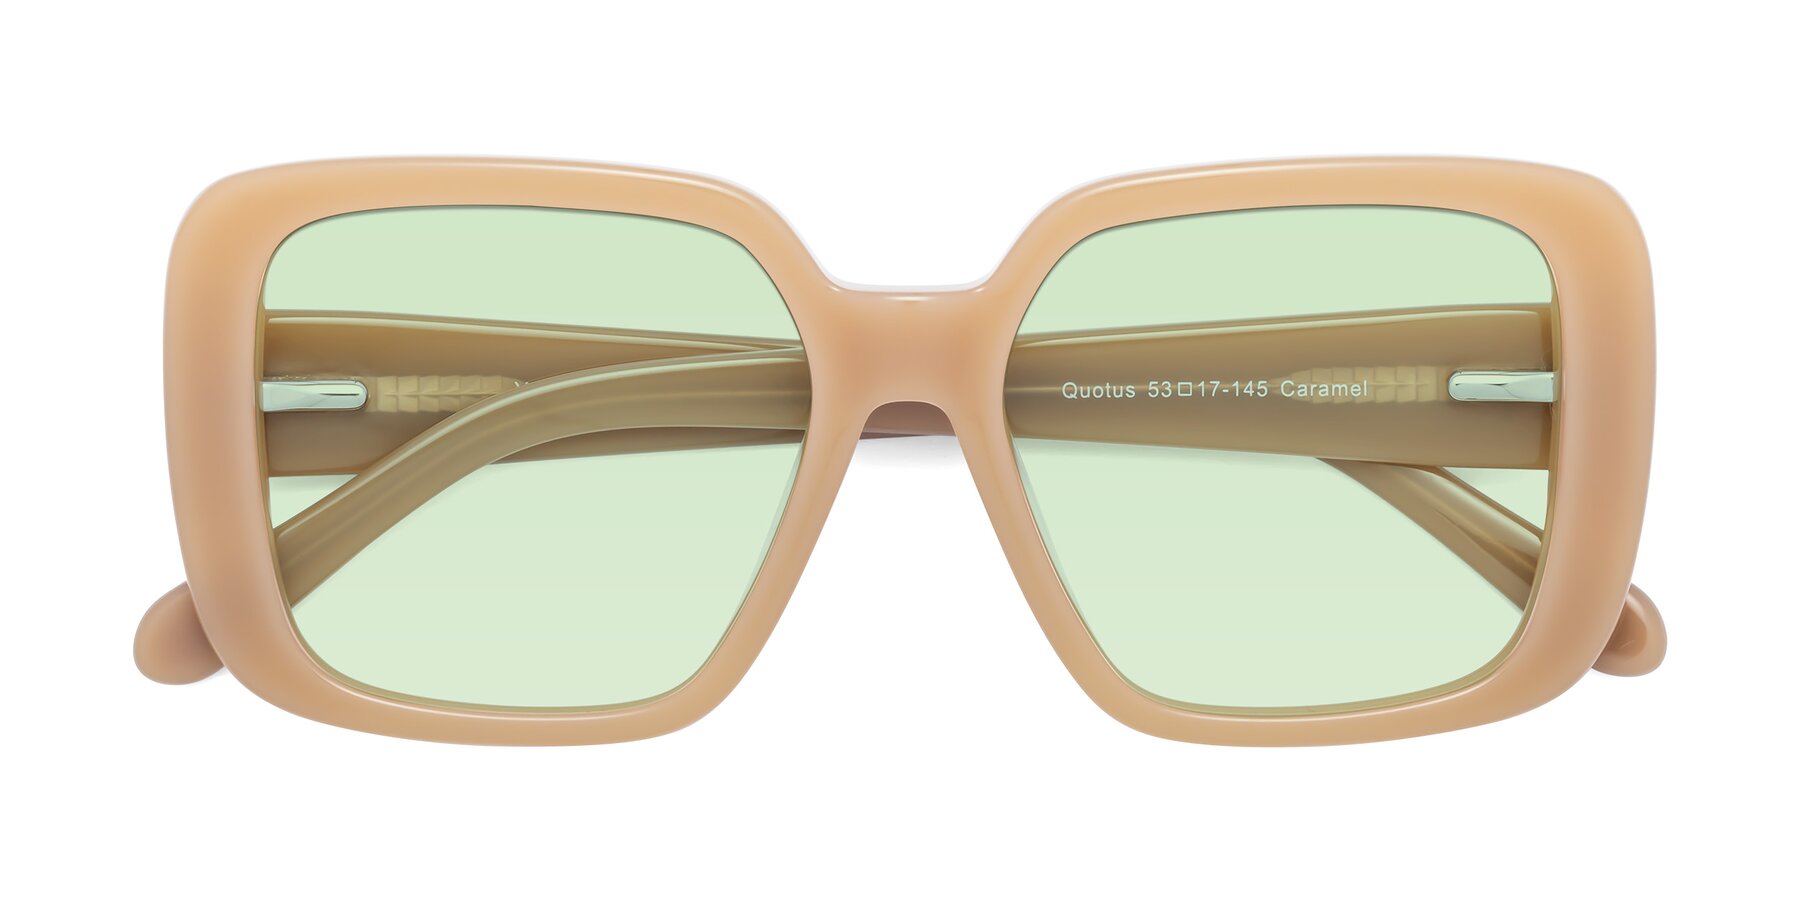 Folded Front of Quotus in Caramel with Light Green Tinted Lenses